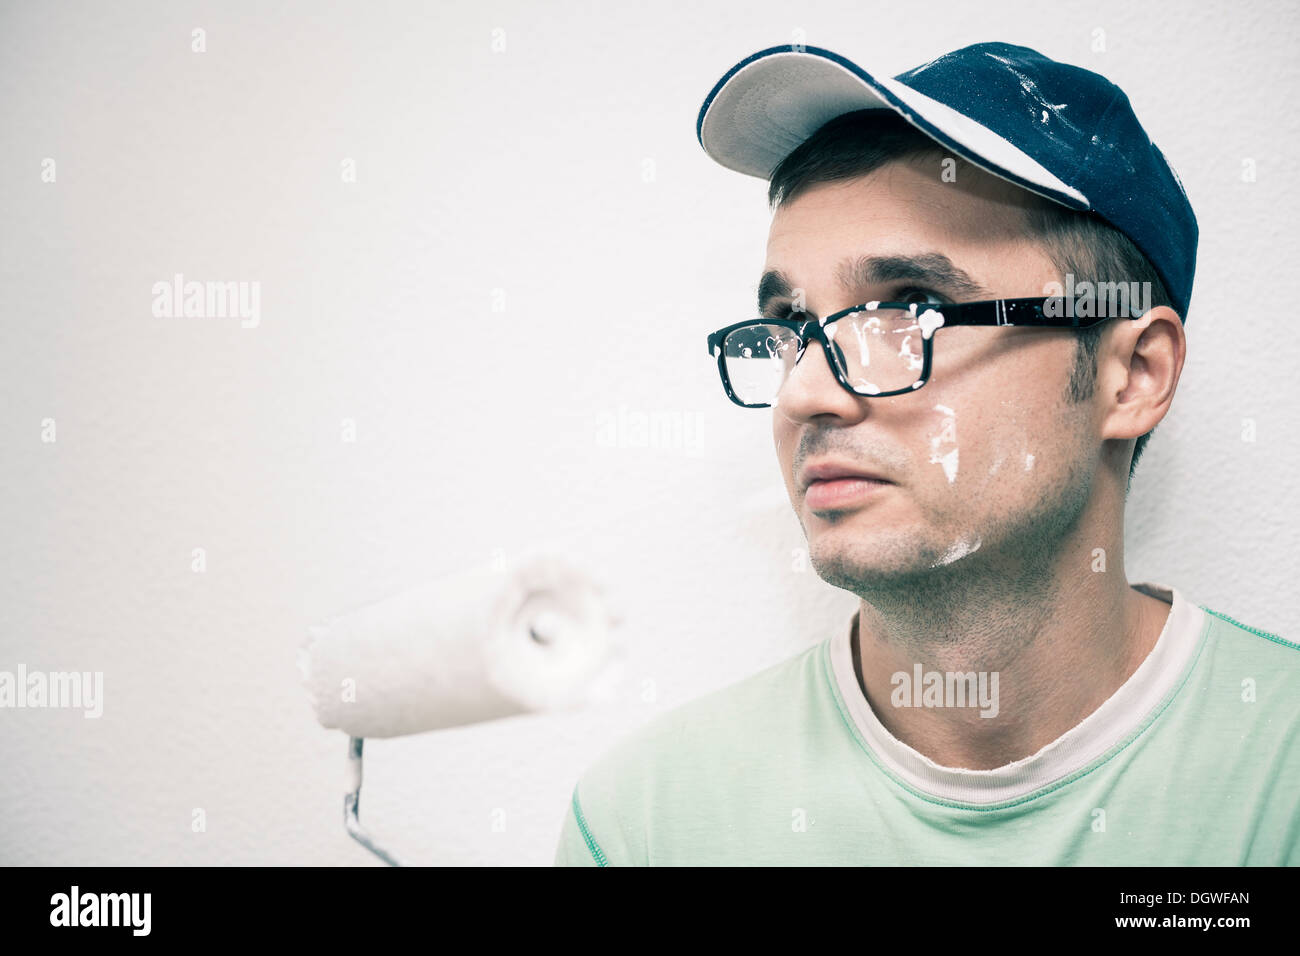 Young man decorating interior with paint roller. Stock Photo